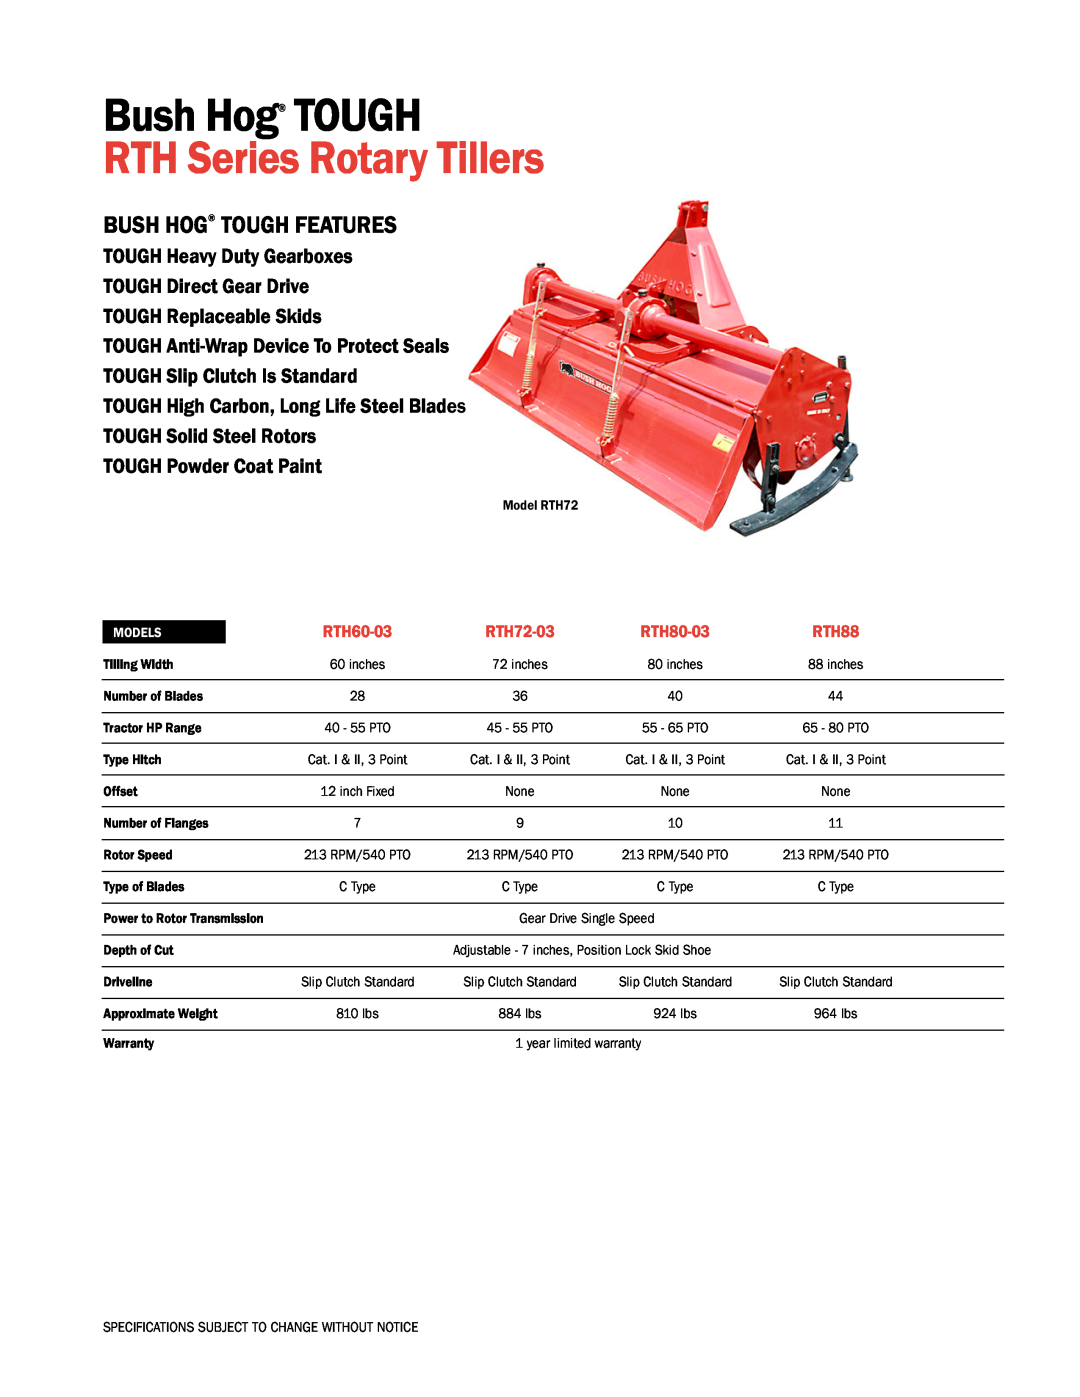 Bush Hog RTH88 specifications RTH Series Rotary Tillers, Bush Hog TOUGH Features, TOUGH Heavy Duty Gearboxes, RTH60-03 